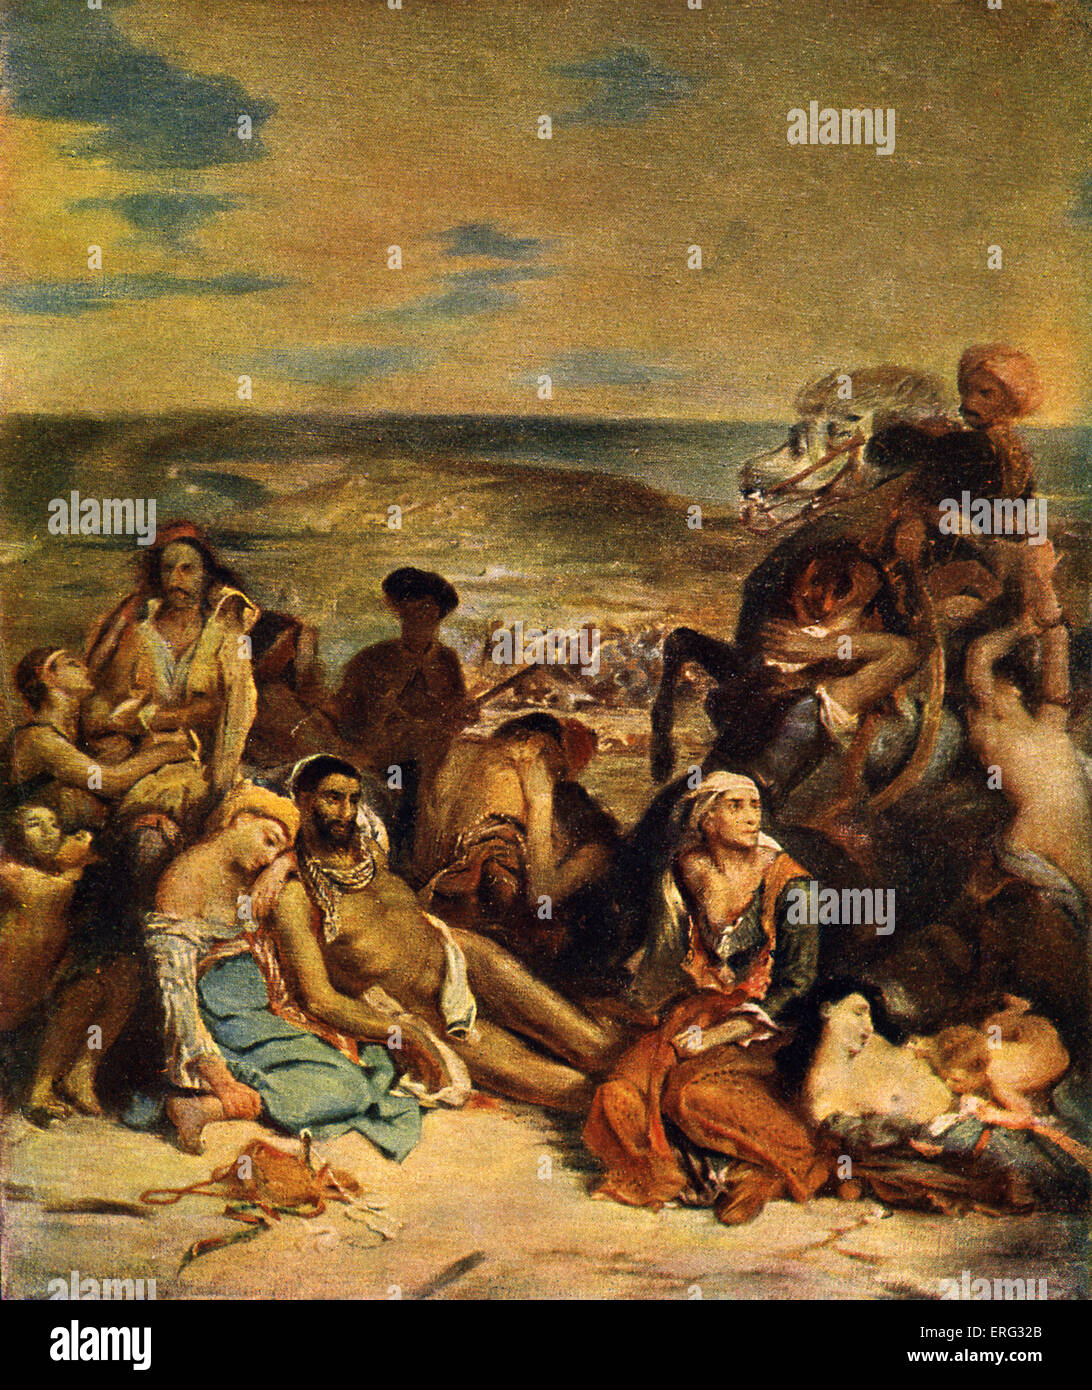 The Massacre at Chios, Greece, of Greeks by Ottoman Turks, 1822.  After Eugene Delacroix 's painting of 1824. Stock Photo